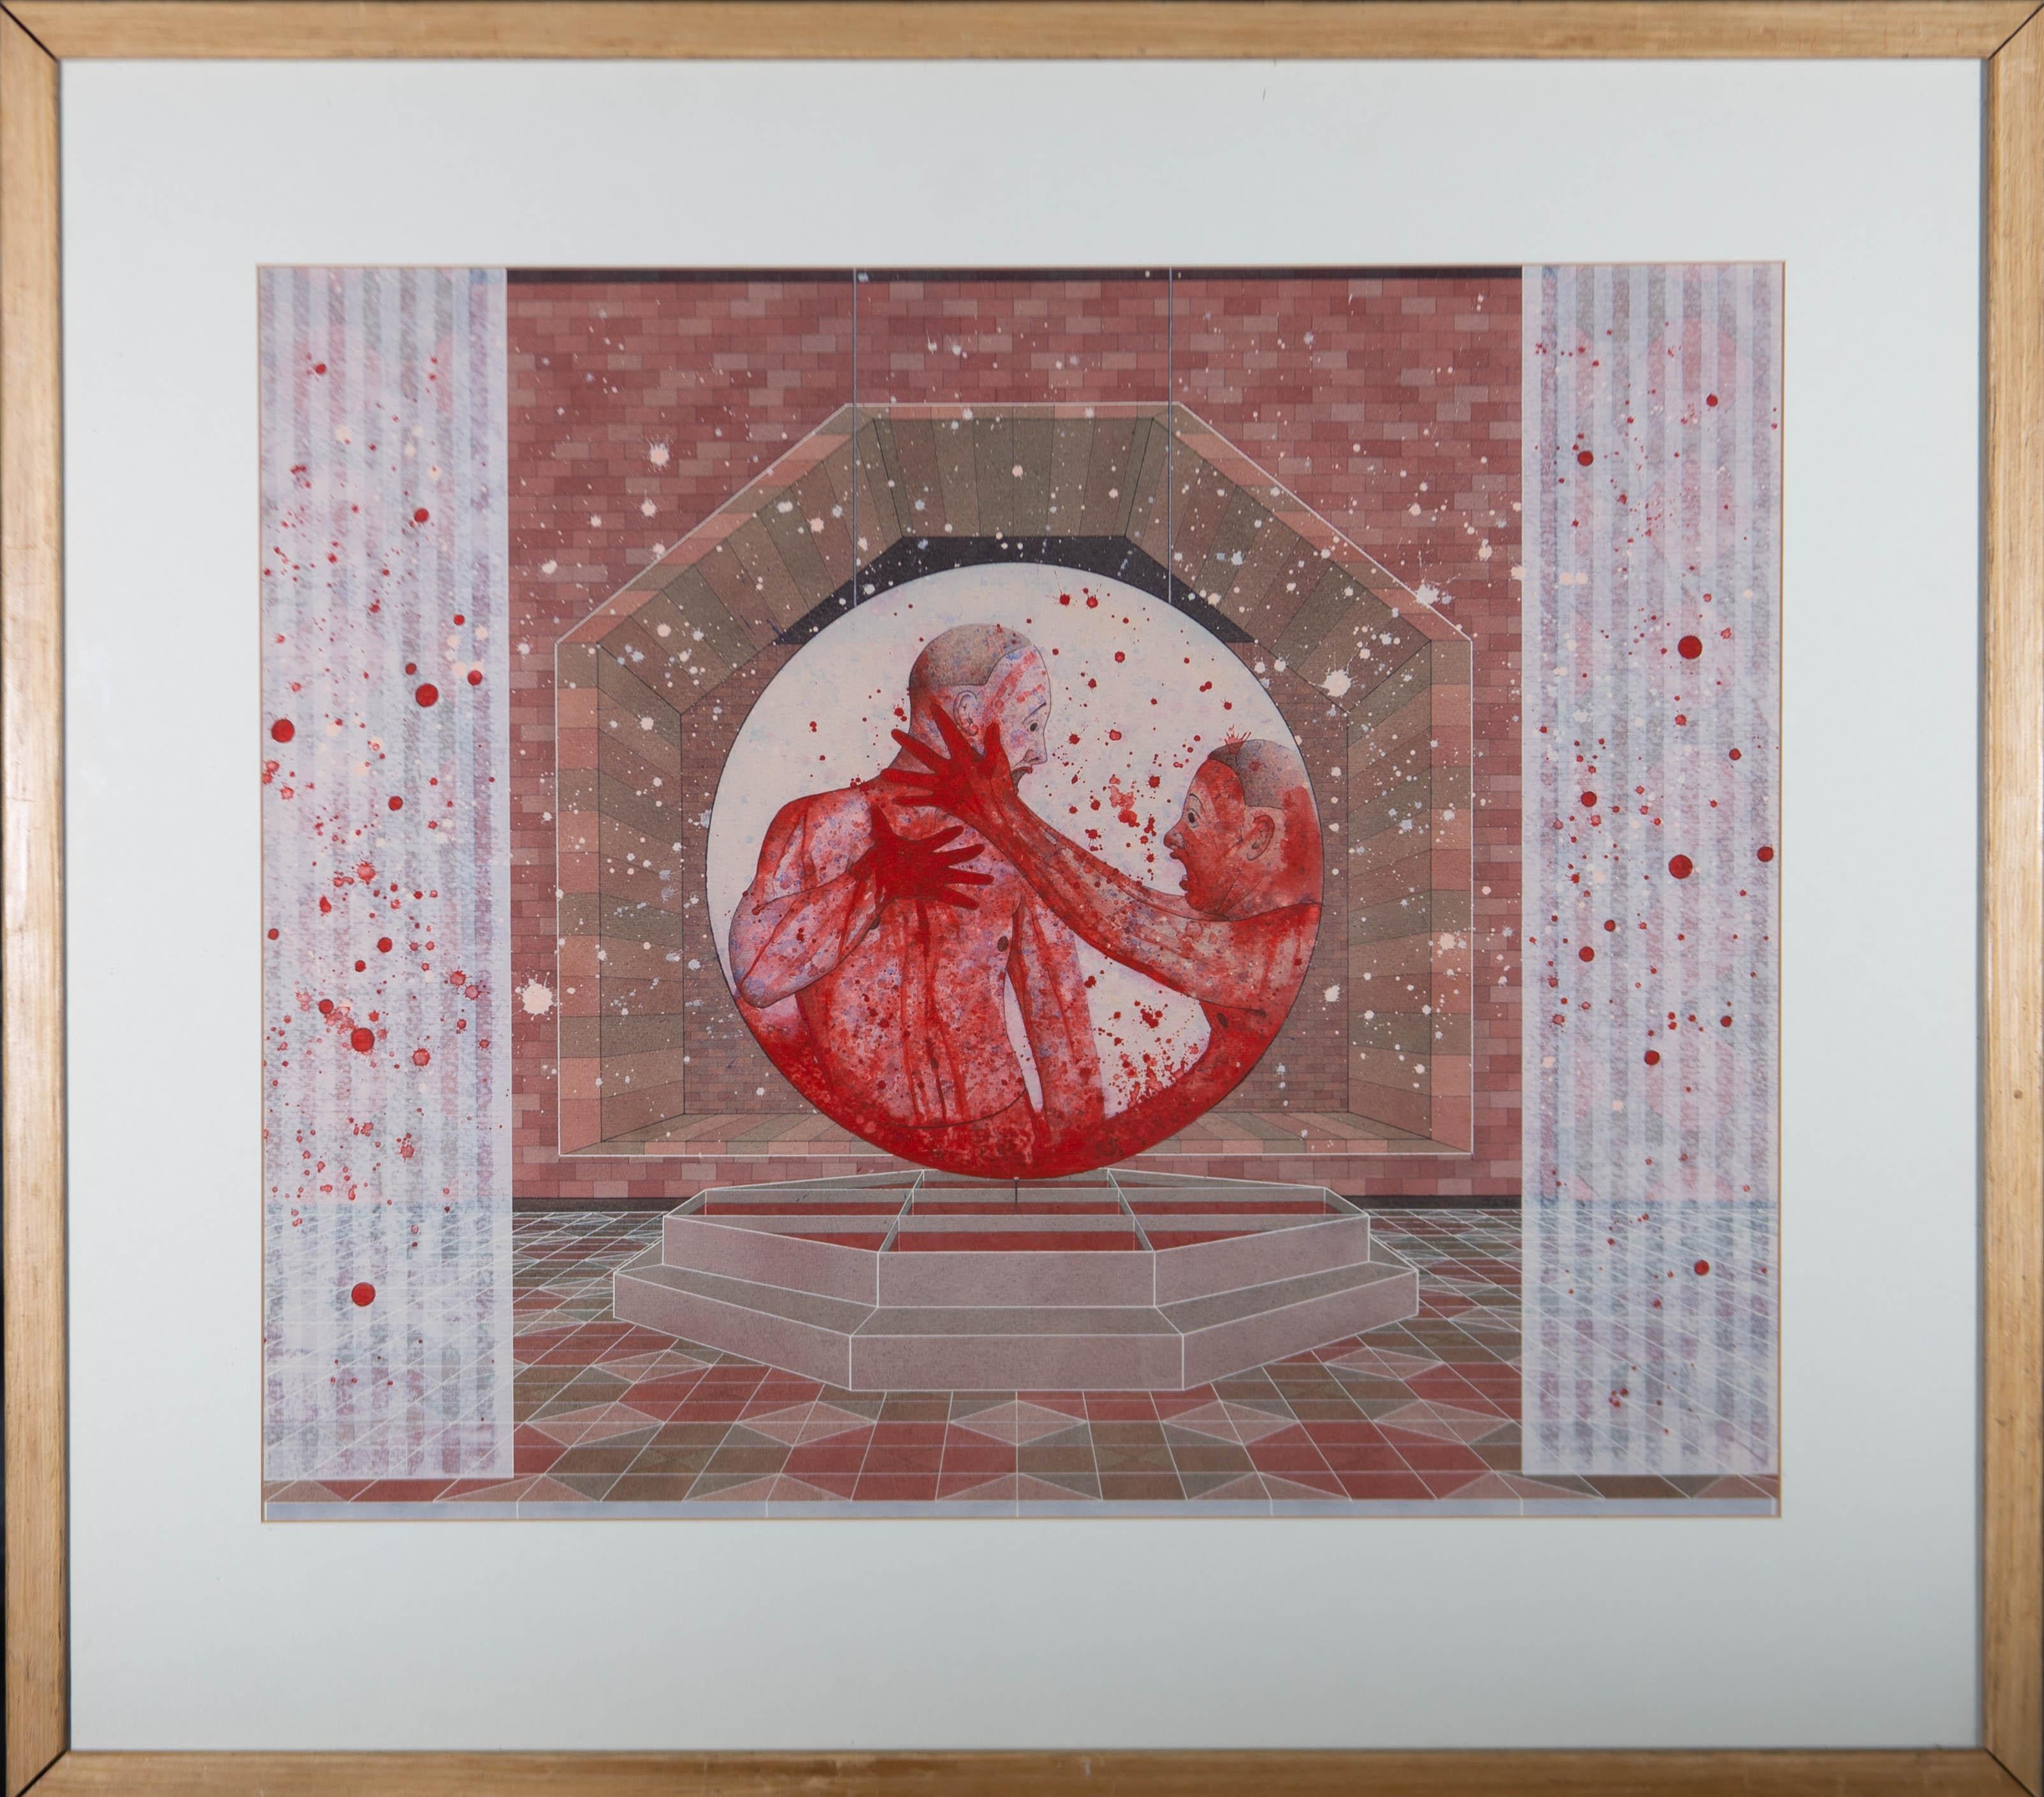 A very precise watercolour painting with gouache and graphite, depicting a surreal scene with two figures, possibly alluding to the Greek mythological story of Patroclus and Achilles. Signed and dated 'James Lewis, 1985' on the reverse of the